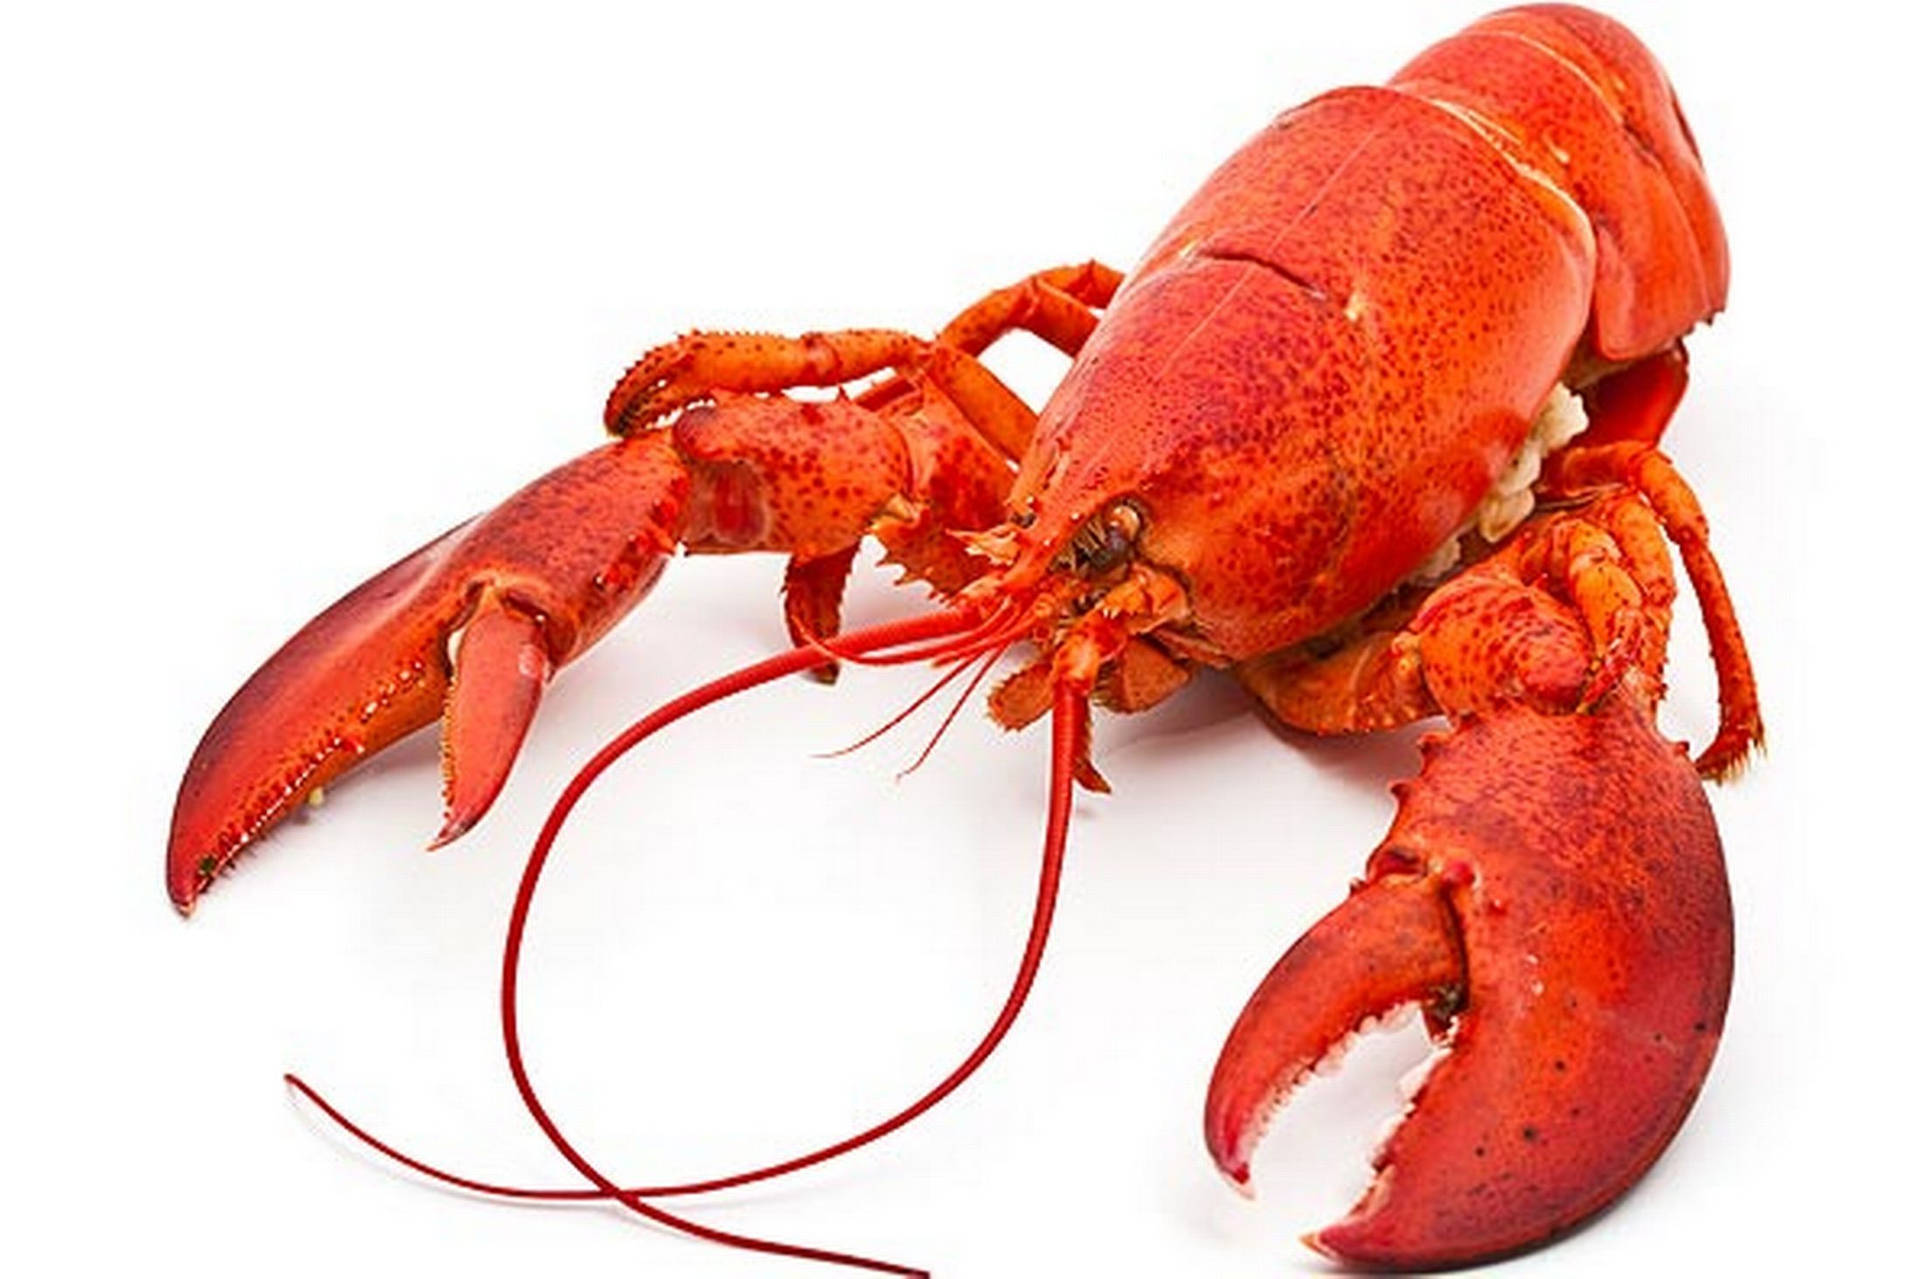 Well-Cooked Lobster Photograph Wallpaper